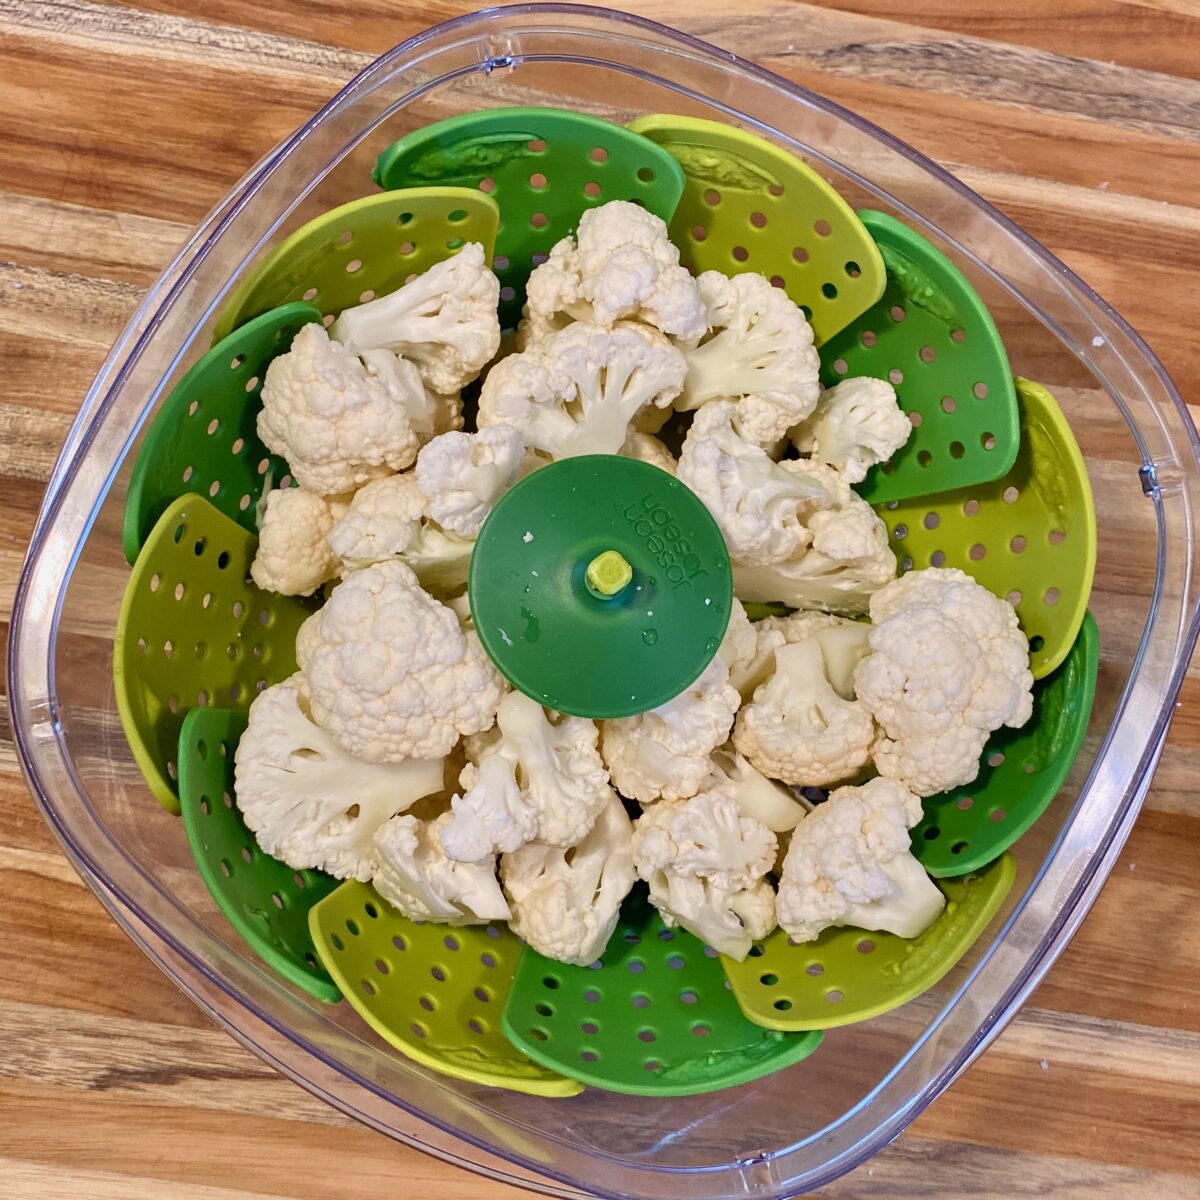 Top view of trimmed cauliflower pieces inside a microwavable steamer.